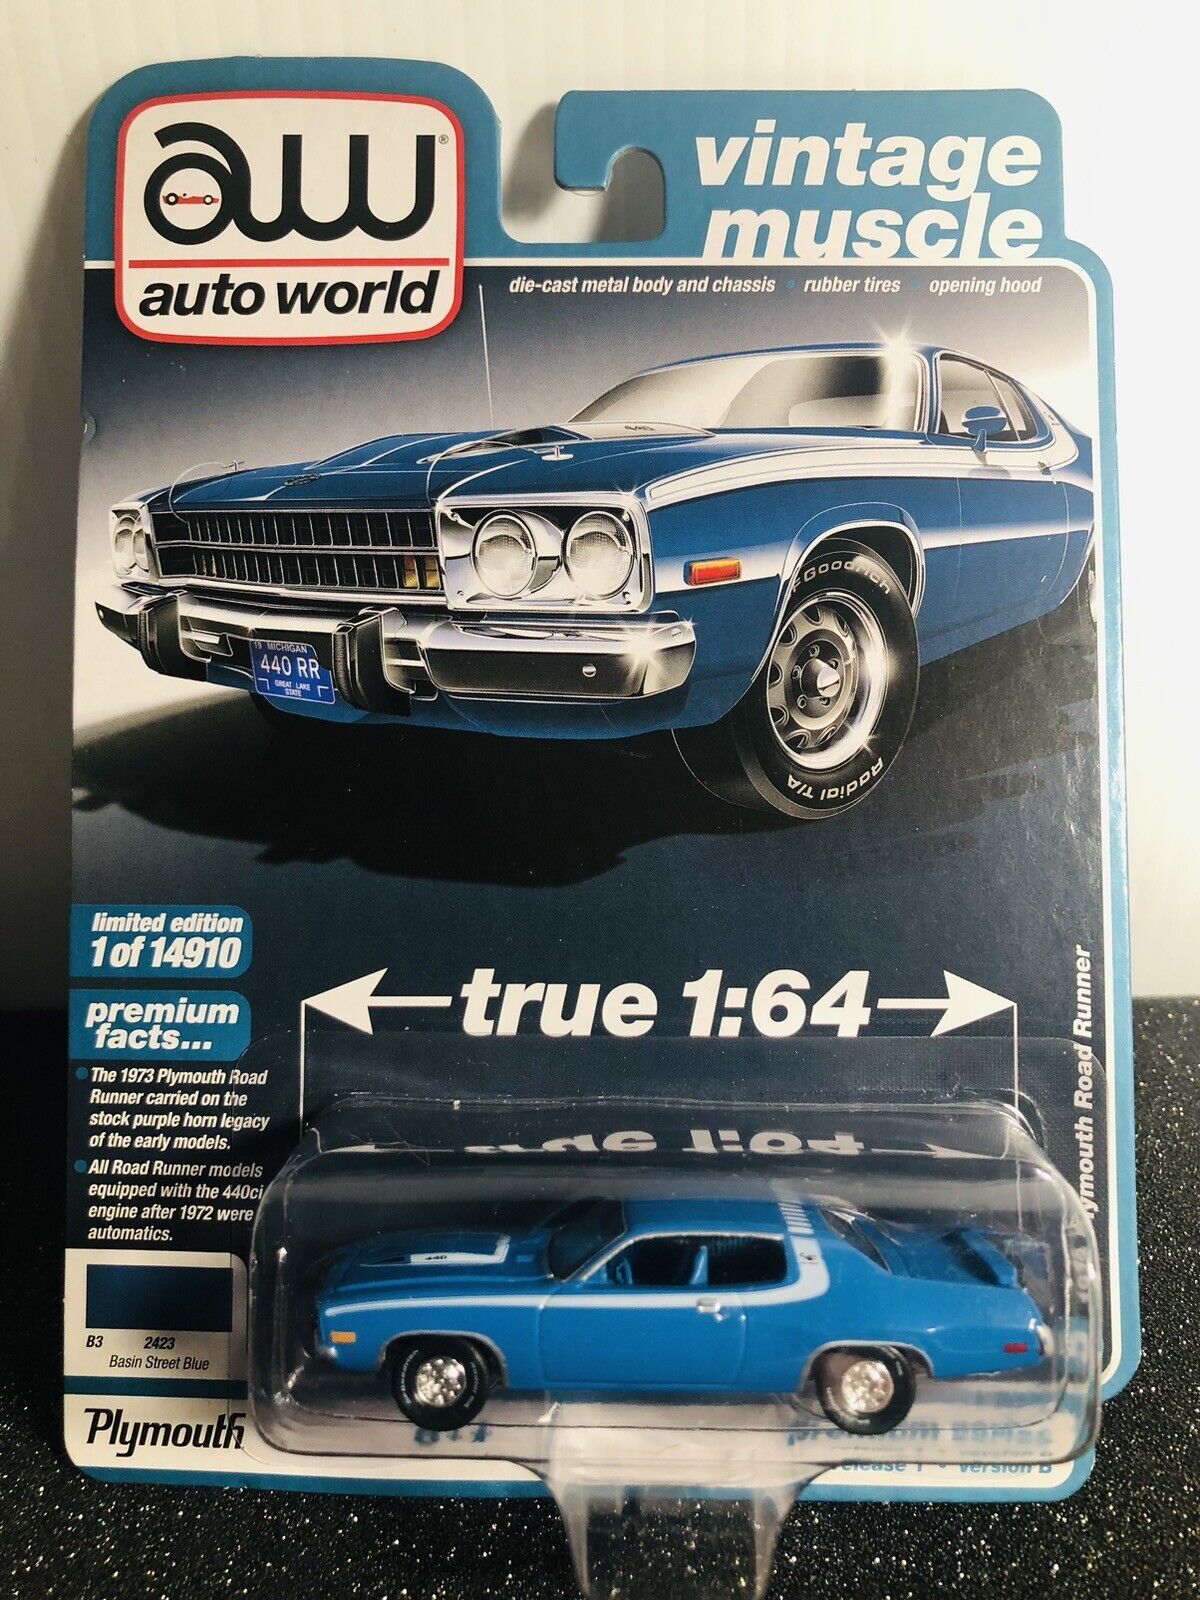 AUTO WORLD VINTAGE MUSCLE  1973 PLYMOUTH ROAD RUNNER LIM.ED. of 14910 BNIB 1:64